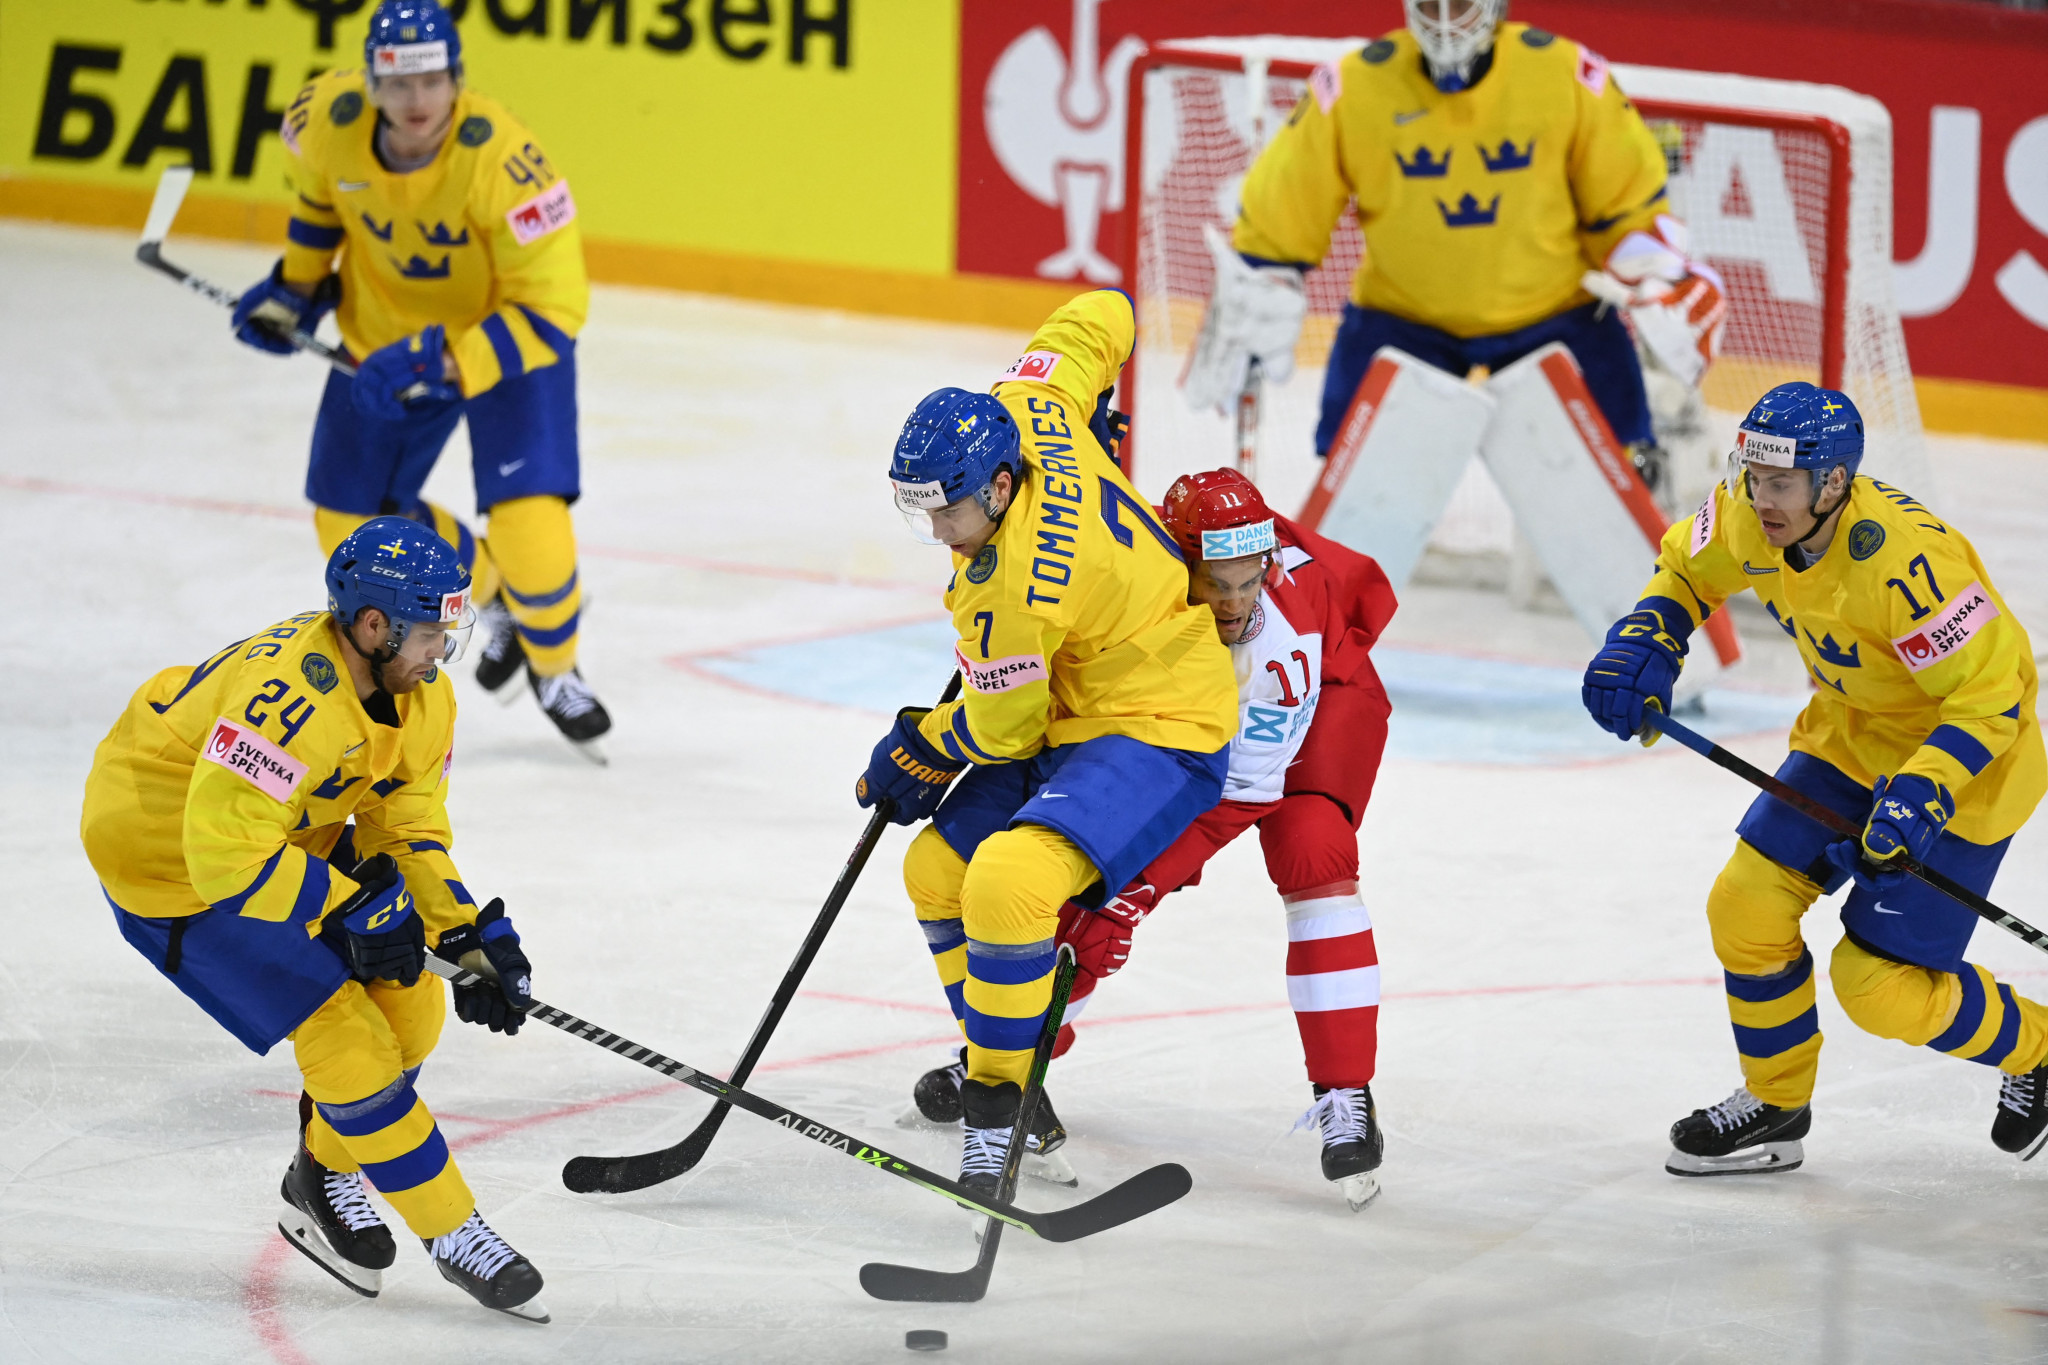 Sweden failed to reach the quarter-finals for the first time since a new format was introduced at this year's IIHF World Championship ©Getty Images